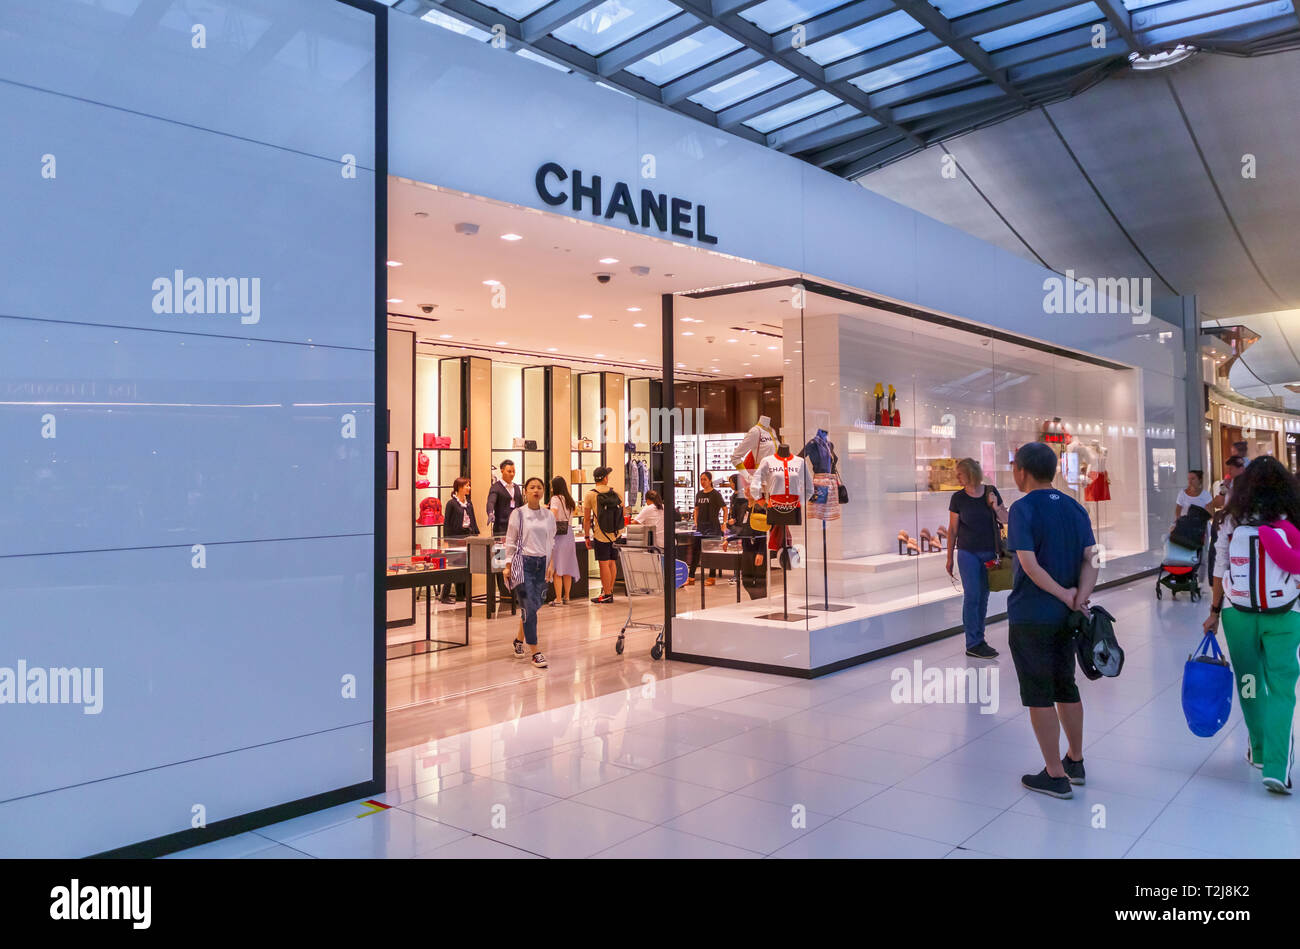 Chanel Shop Front High Resolution Stock Photography and Images - Alamy